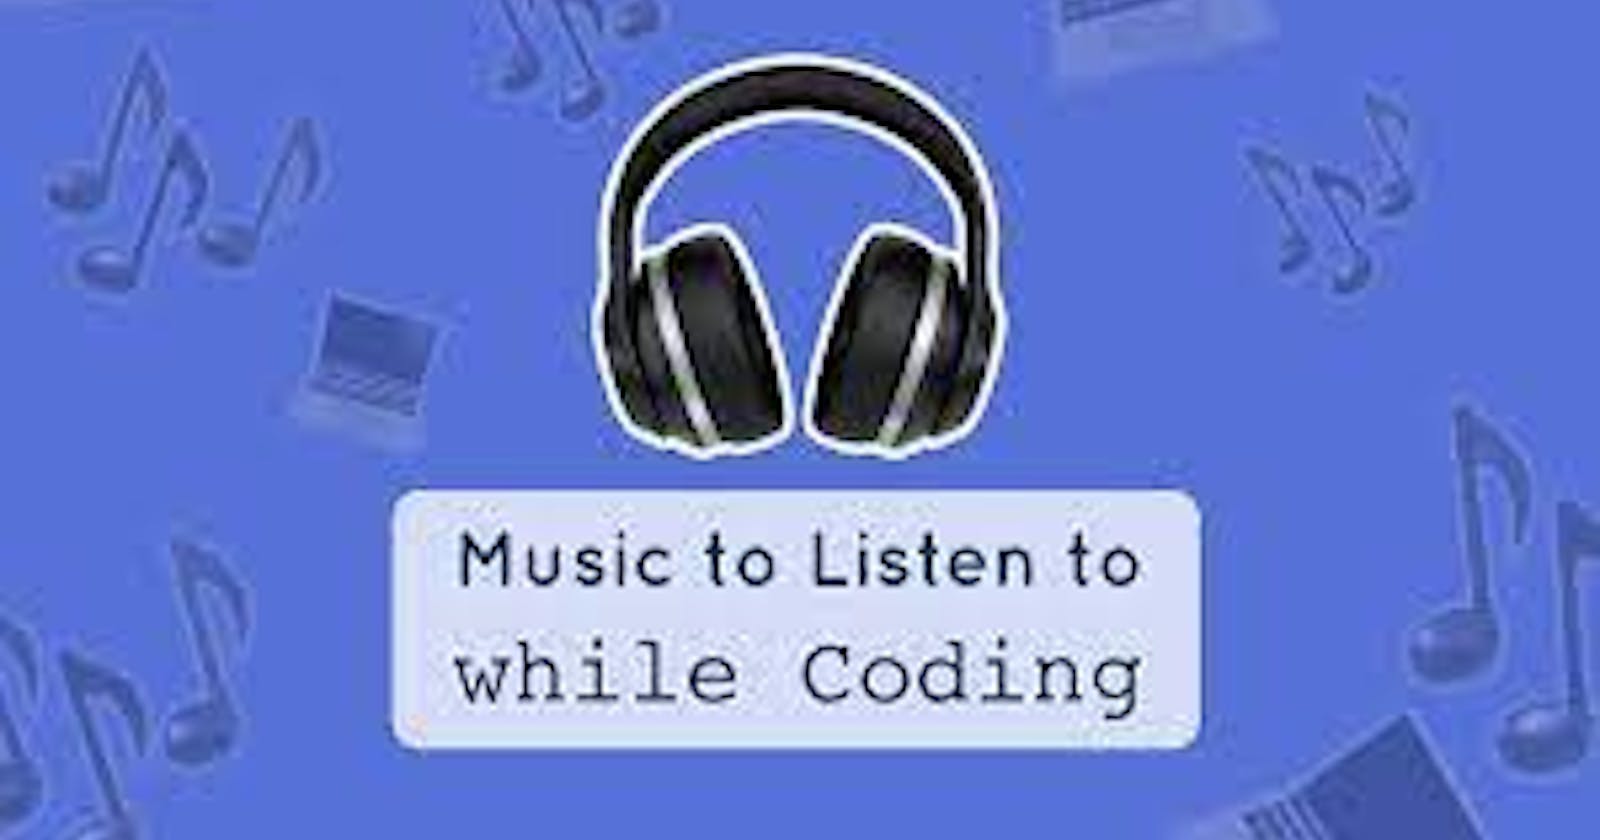 My top  playlist for coding